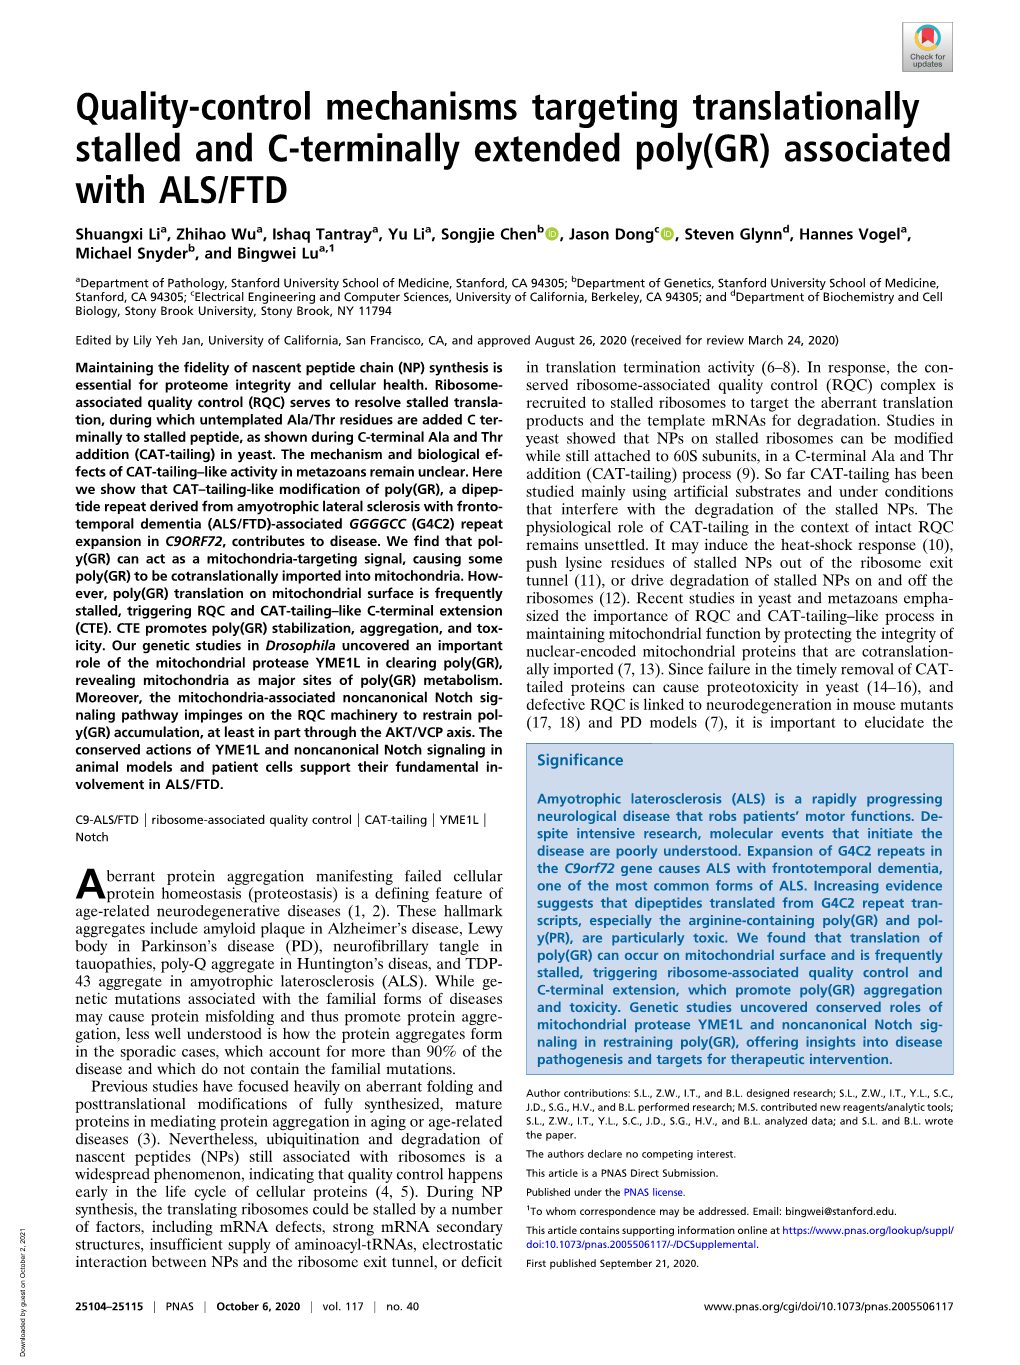 Quality-Control Mechanisms Targeting Translationally Stalled and C-Terminally Extended Poly(GR) Associated with ALS/FTD